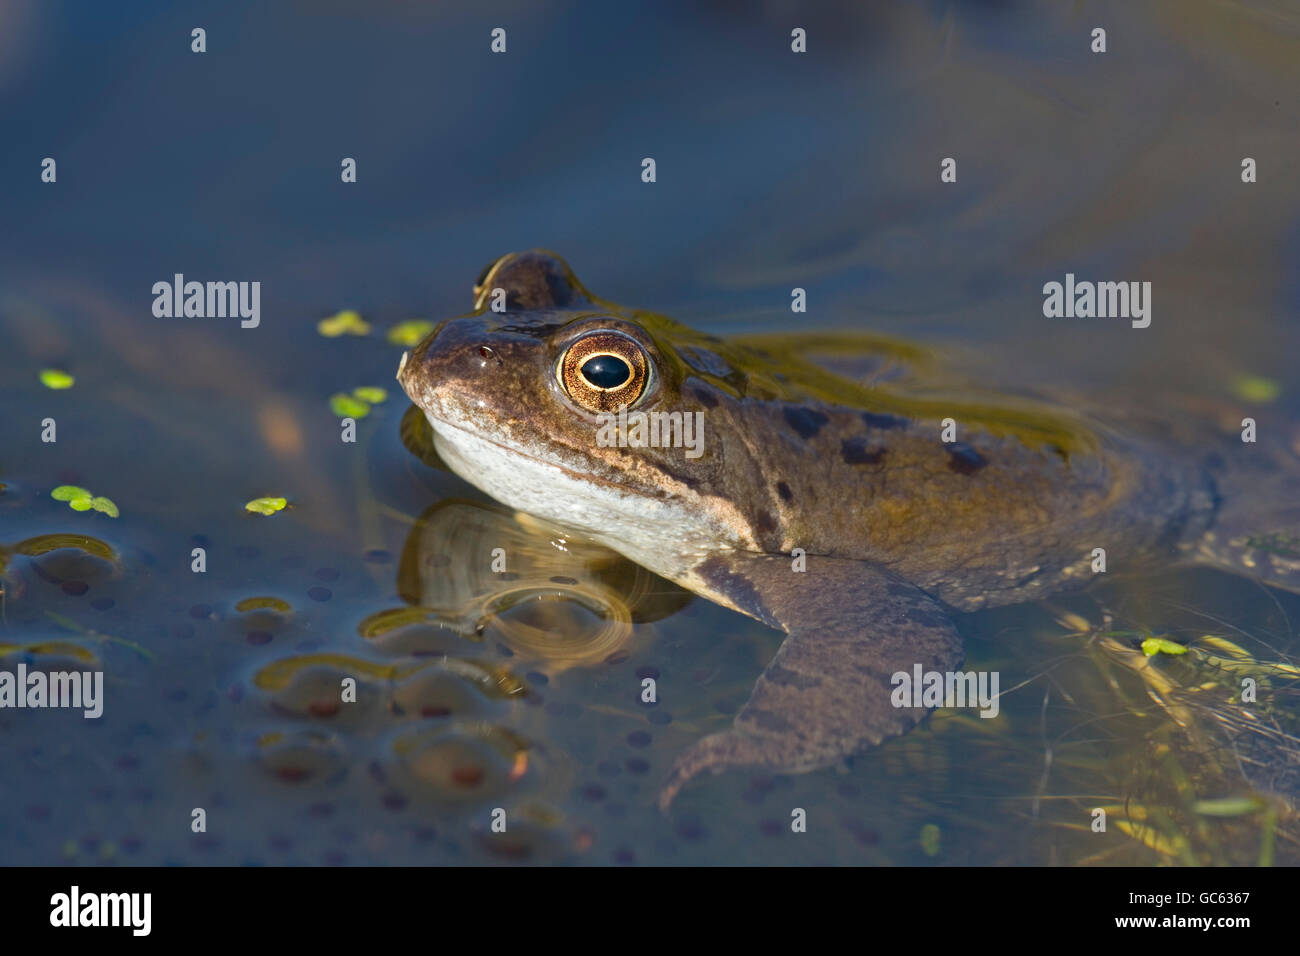 Common Frog Rana temporaria half submerged in garden pond at spawning time Stock Photo